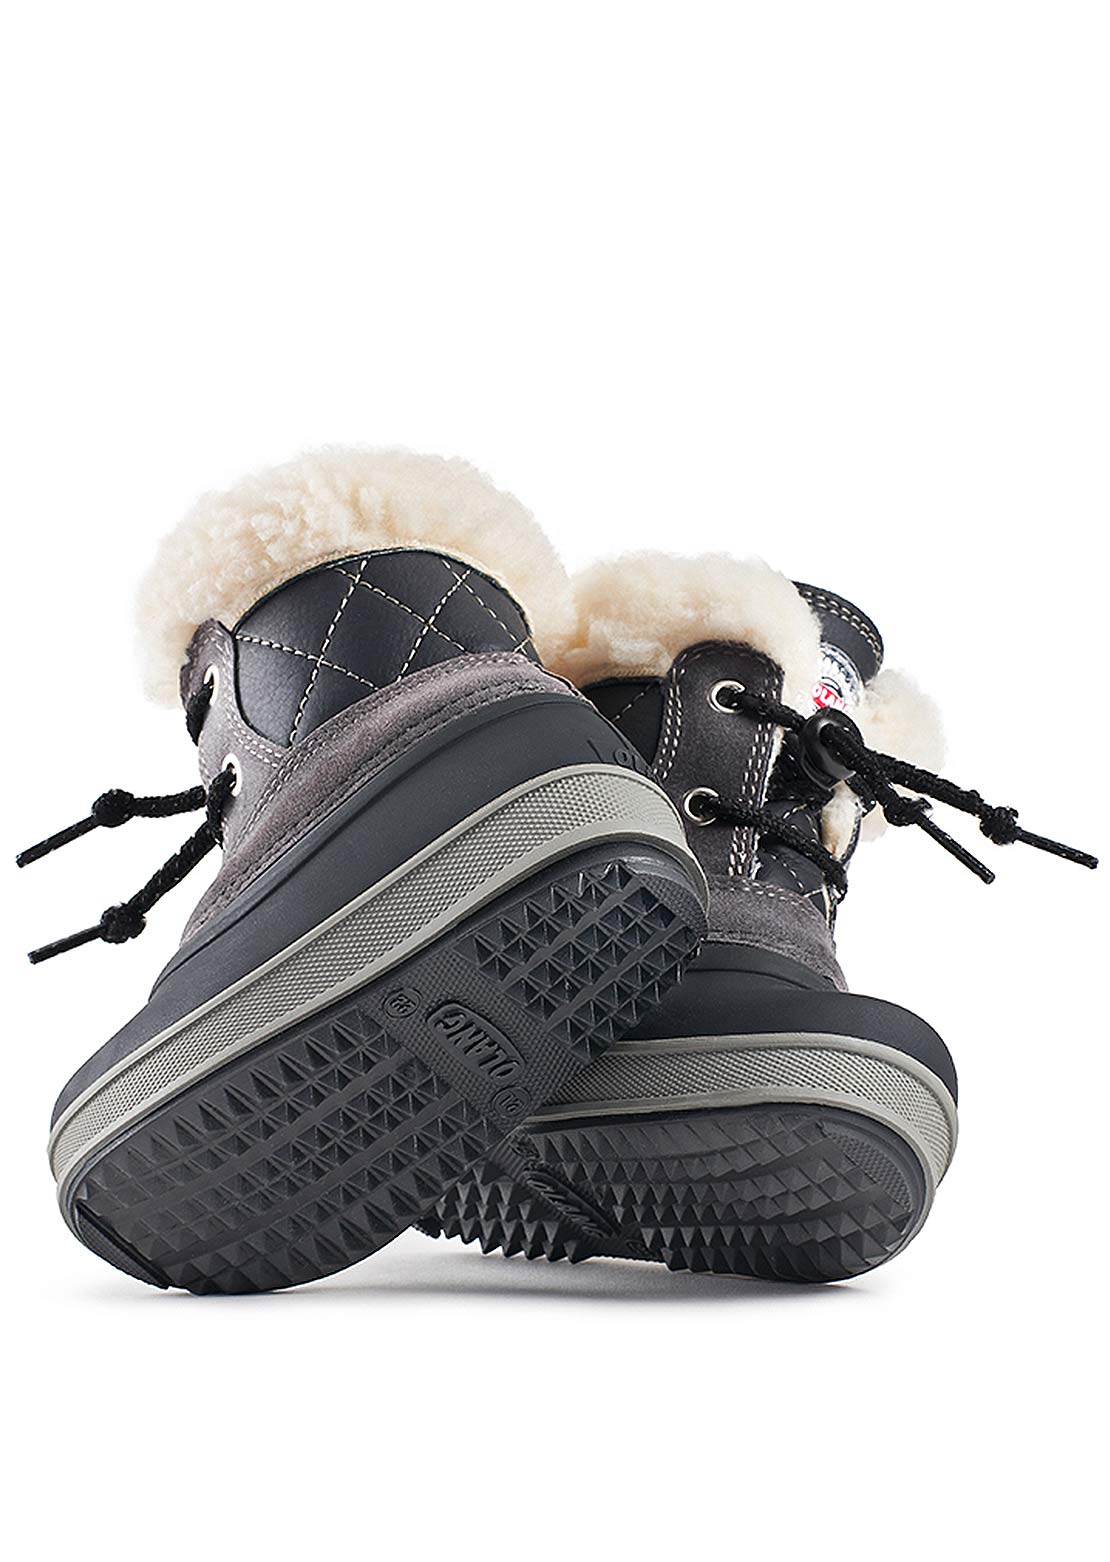 Olang Toddler Ape Boots Anthracite